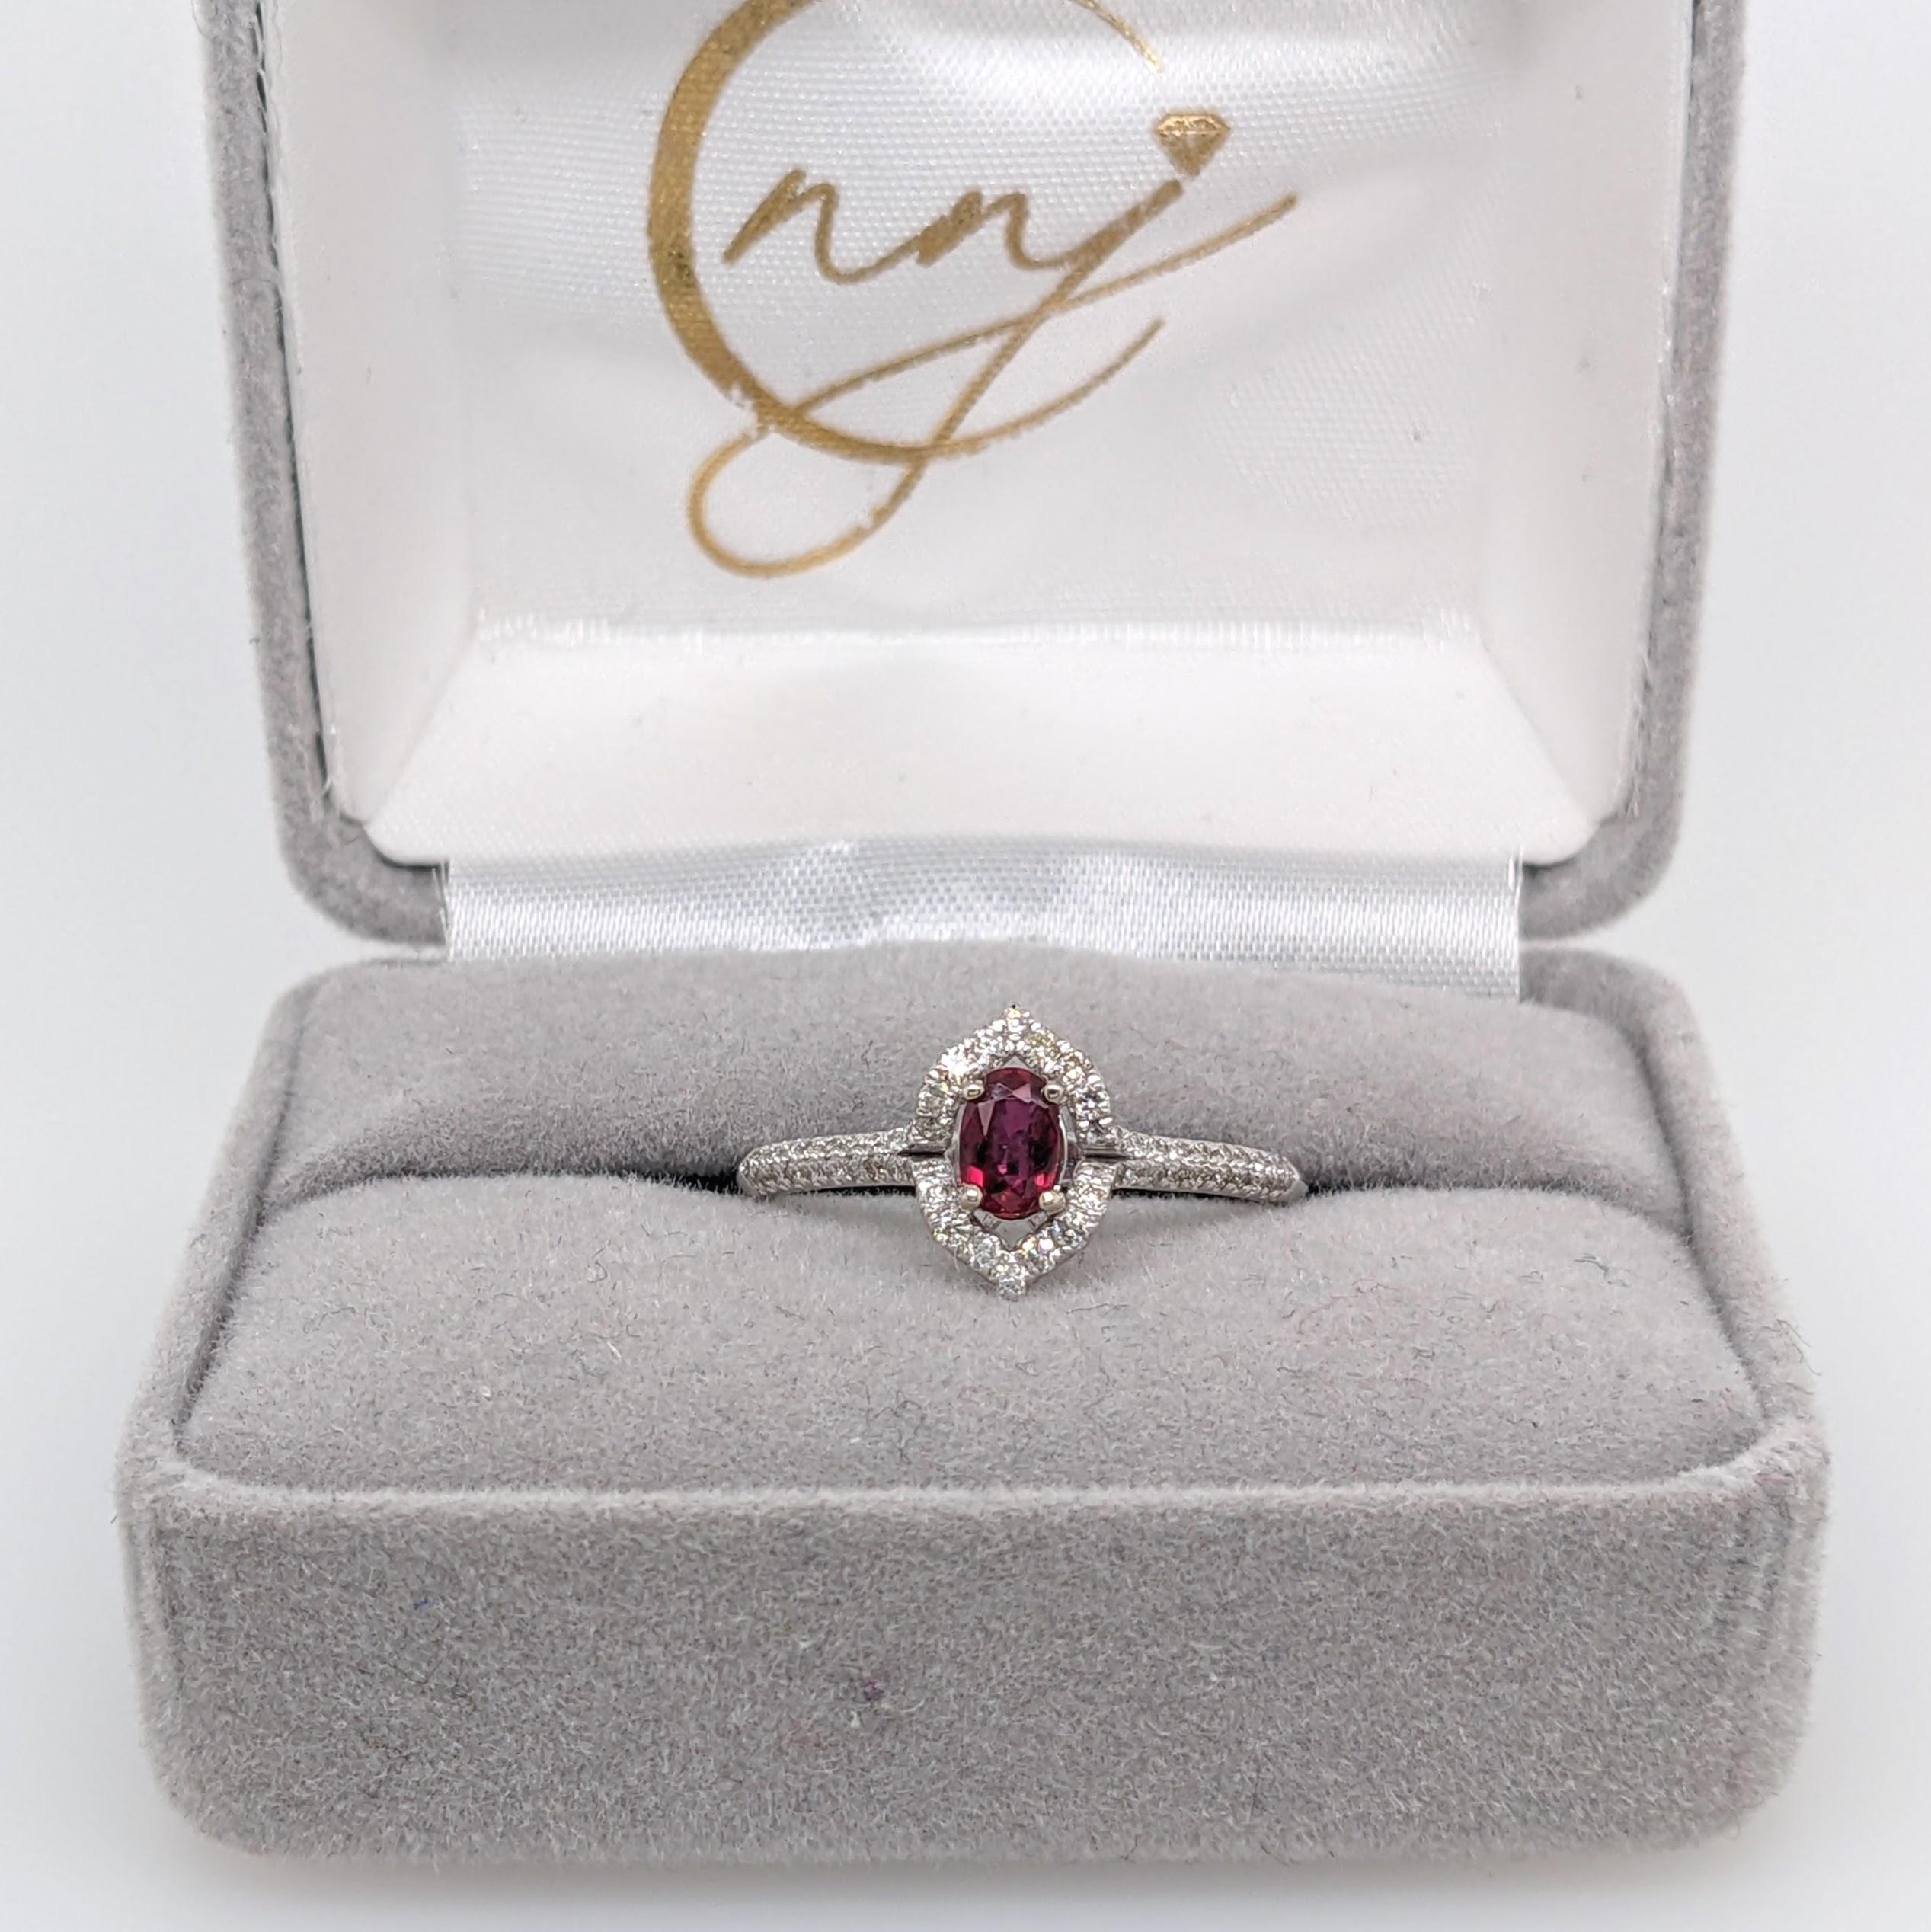 Vintage Inspired Ruby Ring w Diamond Halo in 14K White Gold Oval 5x3.5mm 4